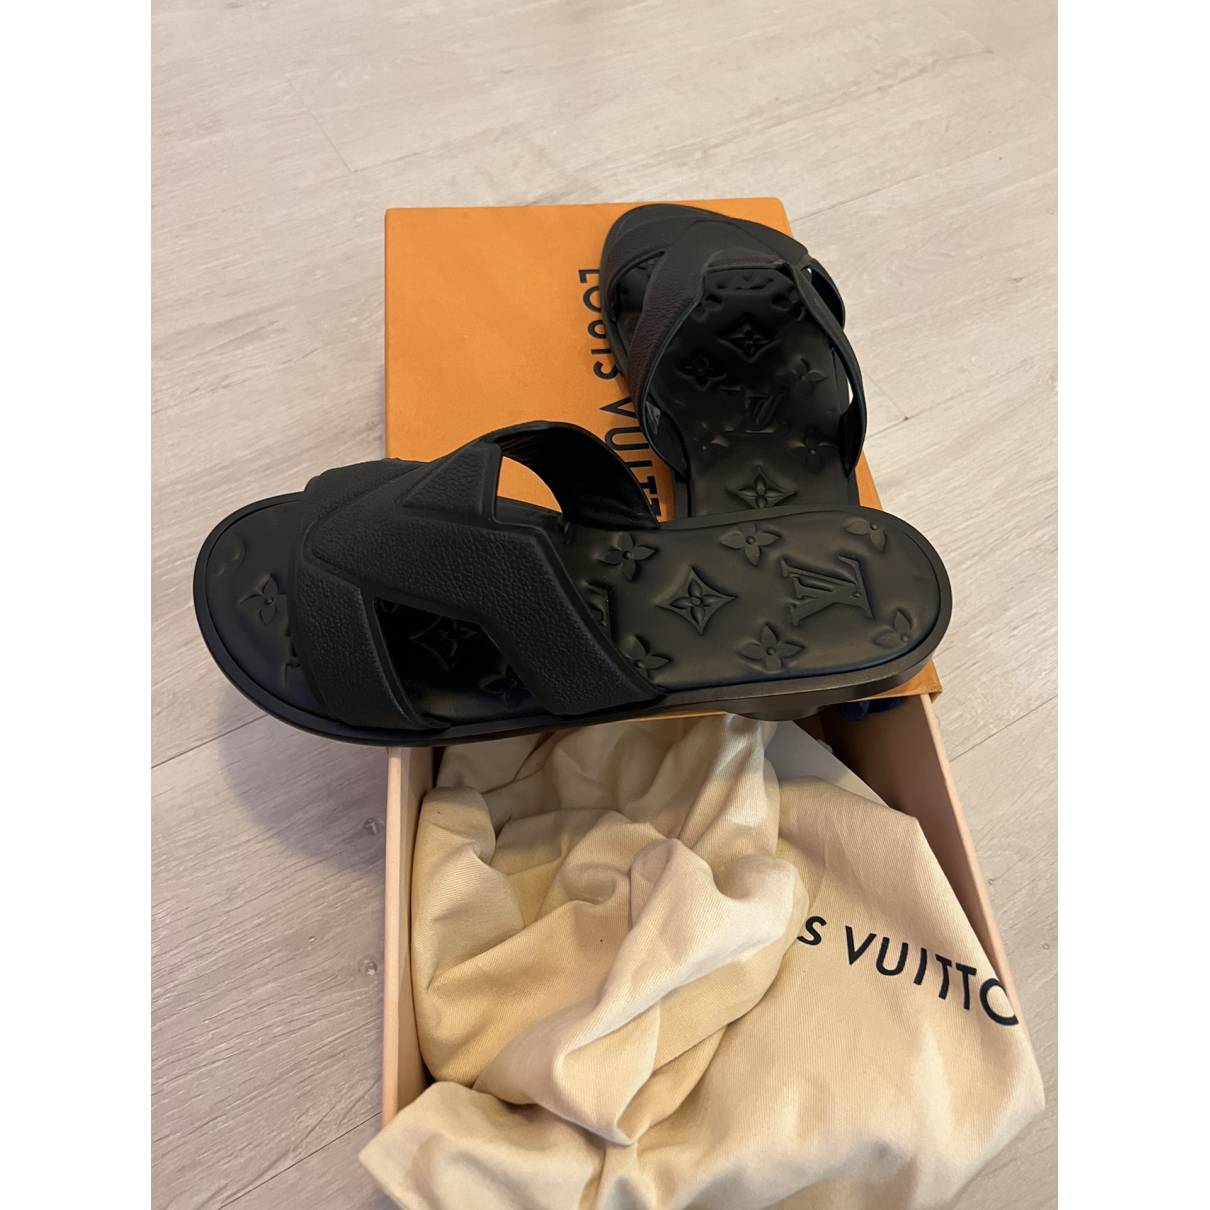 Louis Vuitton - Authenticated Sandal - Leather Black Plain for Men, Never Worn, with Tag